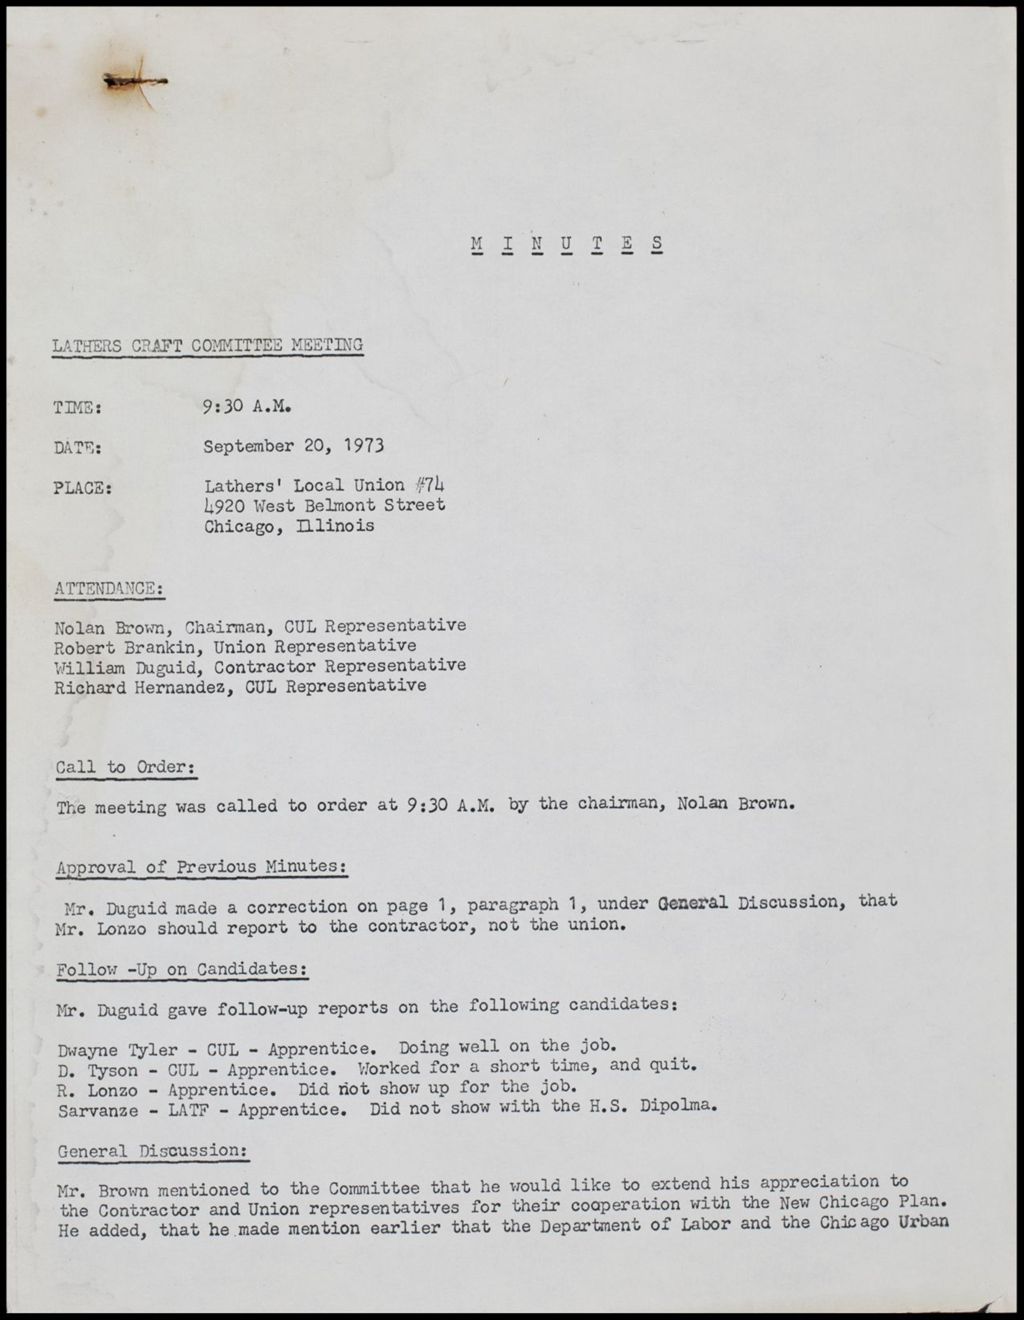 Lathers' Craft Committee Minutes, 1973 (Folder II-937)